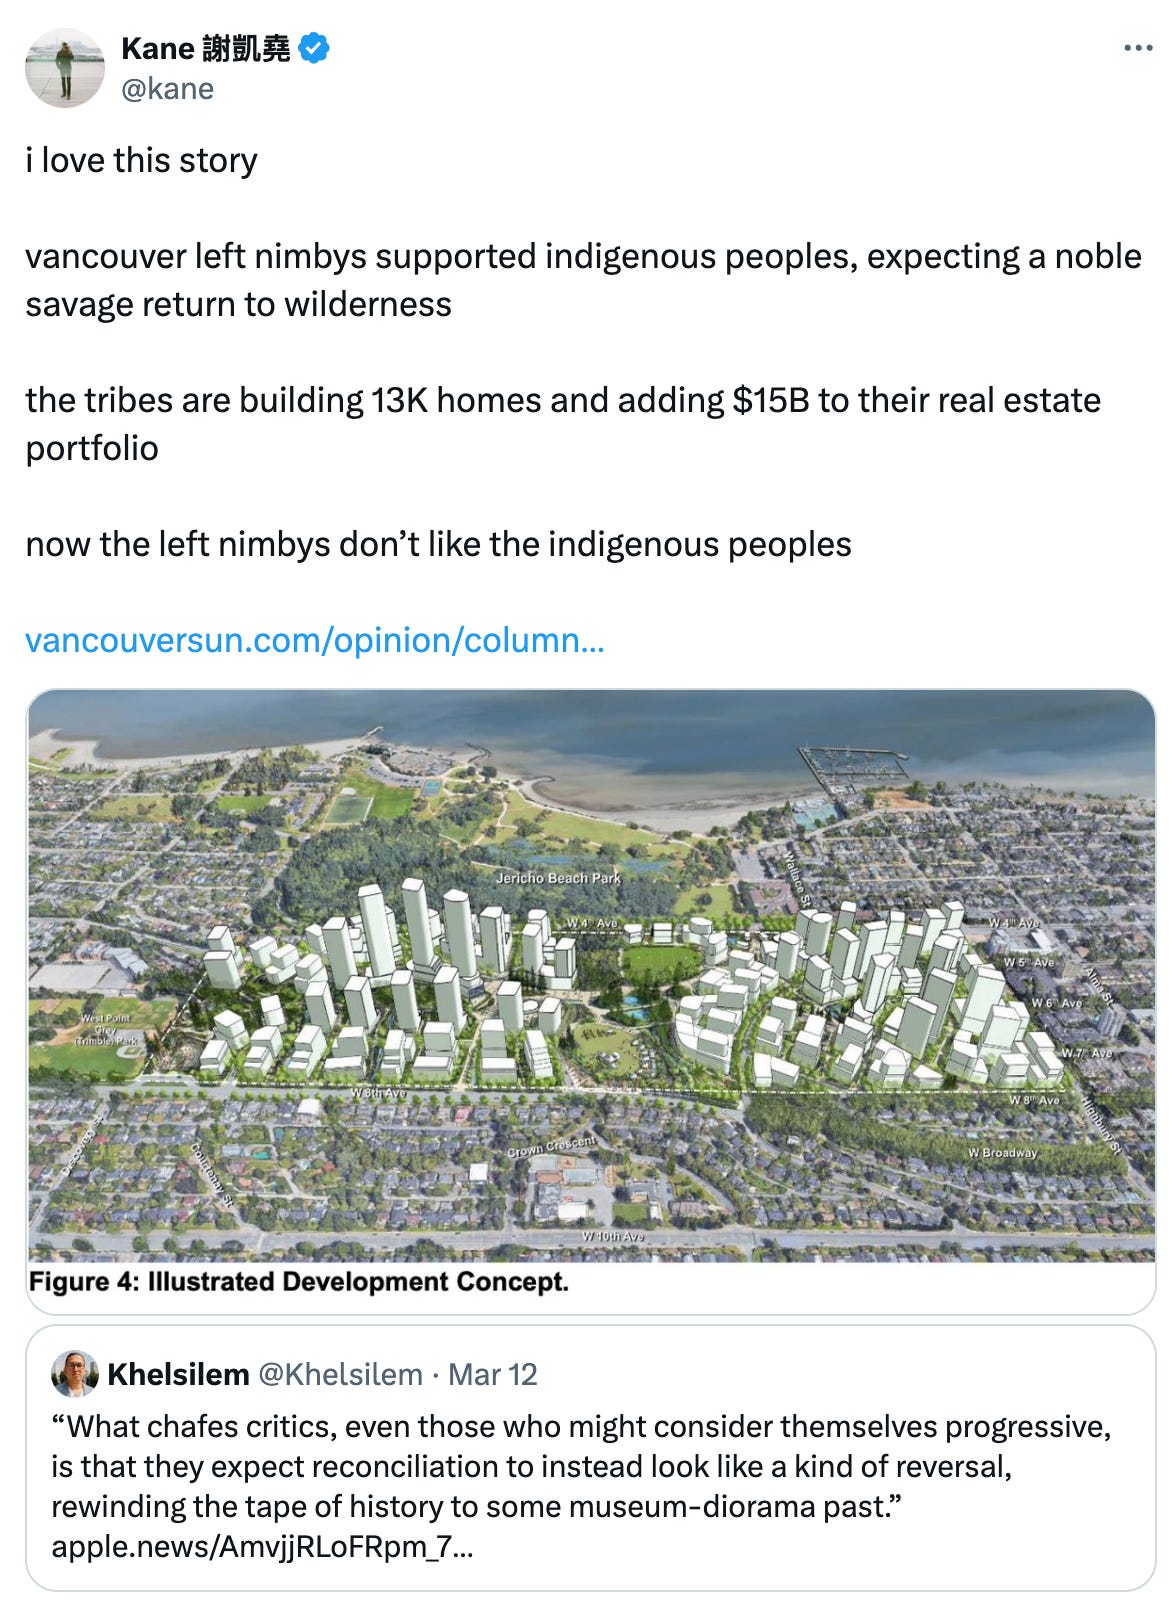  Kane 謝凱堯 @kane i love this story  vancouver left nimbys supported indigenous peoples, expecting a noble savage return to wilderness  the tribes are building 13K homes and adding $15B to their real estate portfolio   now the left nimbys don’t like the indigenous peoples  https://vancouversun.com/opinion/columnists/first-nations-reveal-new-concept-for-jericho-lands-redevelopment Quote Khelsilem @Khelsilem · Mar 12 “What chafes critics, even those who might consider themselves progressive, is that they expect reconciliation to instead look like a kind of reversal, rewinding the tape of history to some museum-diorama past.” https://apple.news/AmvjjRLoFRpm_7V0vOM4Y0g